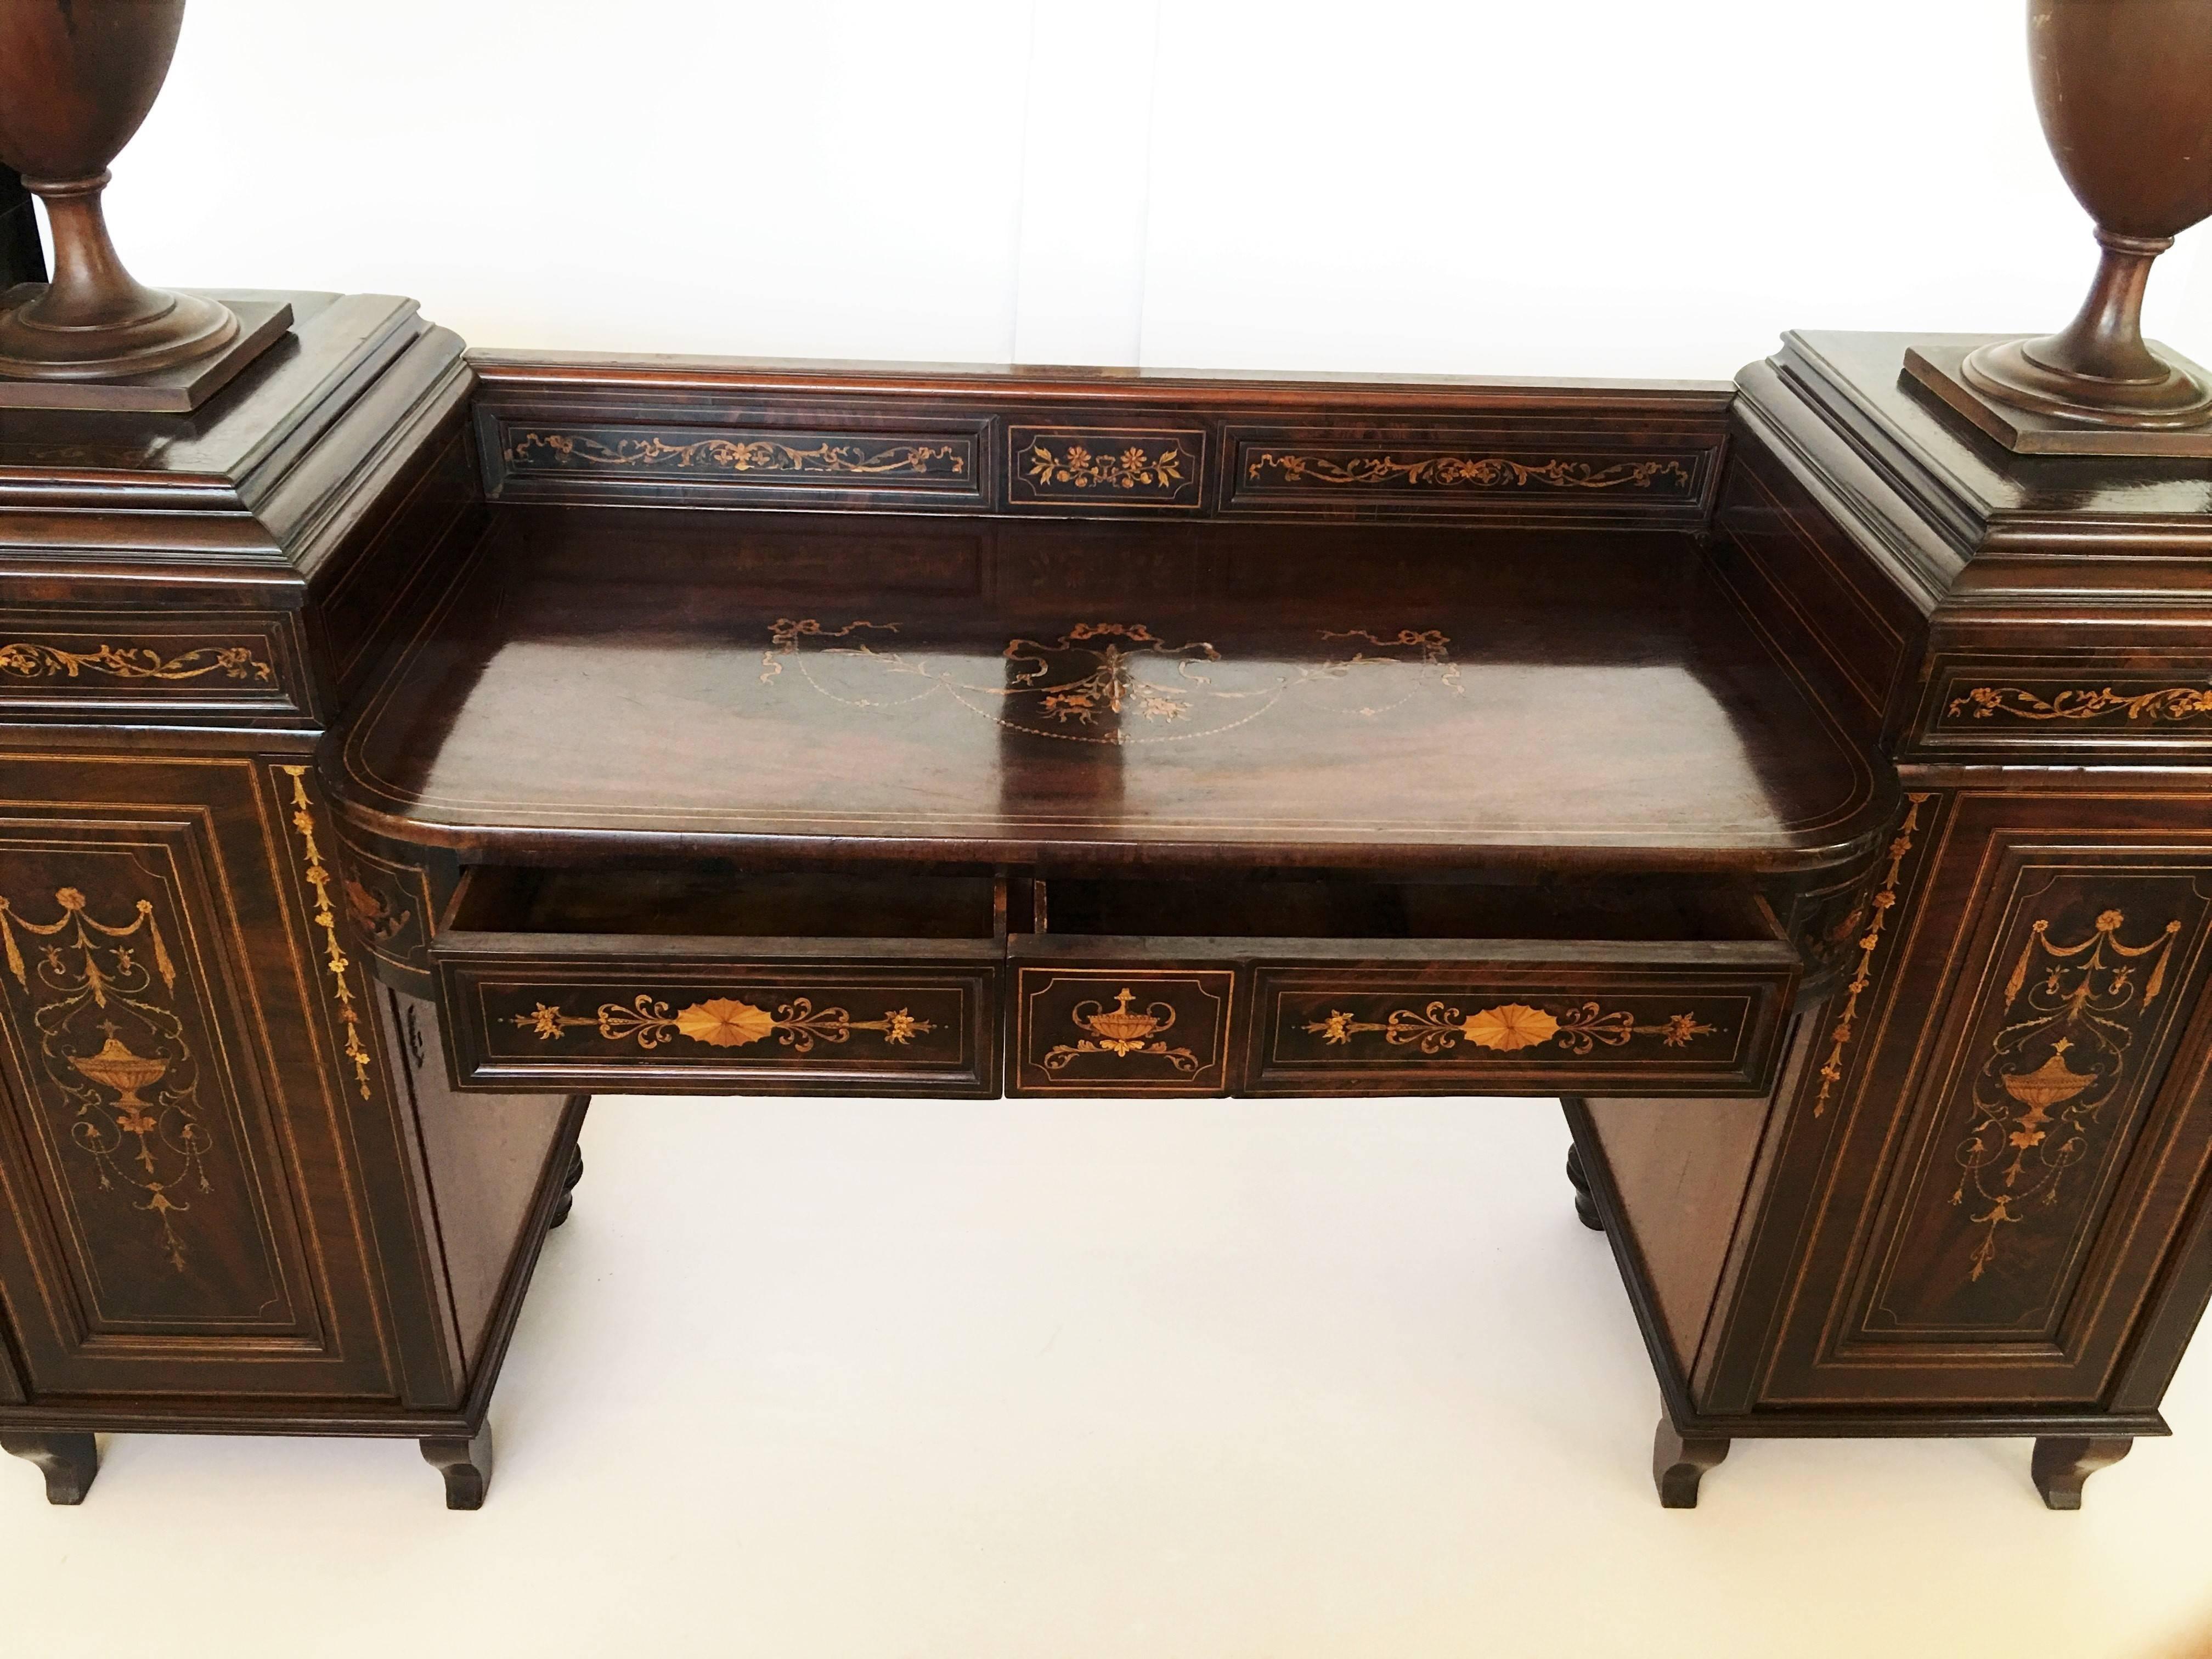 Early 19th Century Regency Marquetry Inlaid Rosewood Pedestal Sideboard with Urn In Good Condition For Sale In Dallas, TX